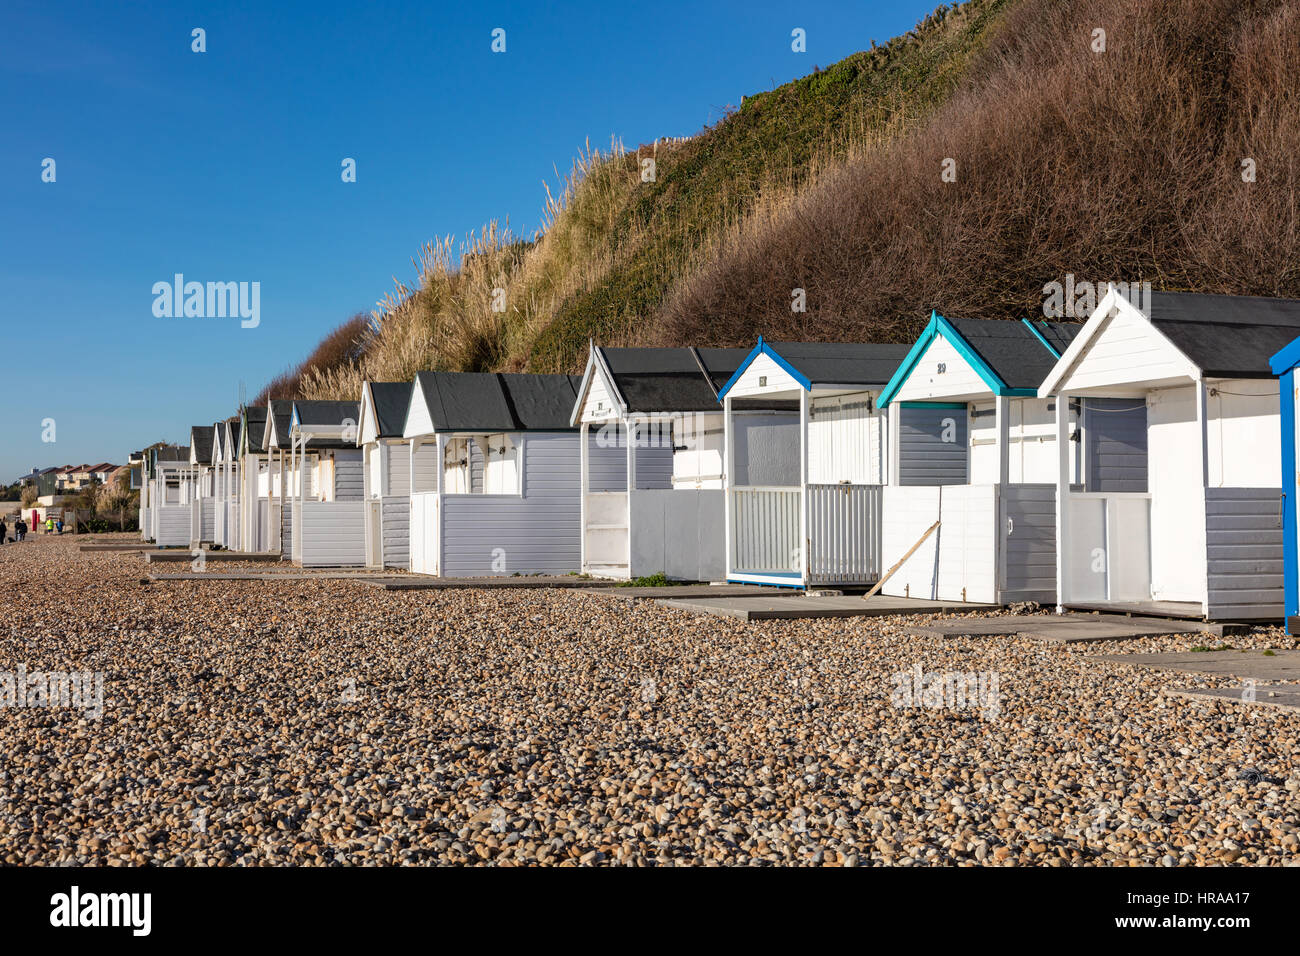 A row of beach huts under the cliffs at Bexhill, on the shingle beach under a blue sky, Bexhill on Sea, East Sussex, UK Stock Photo